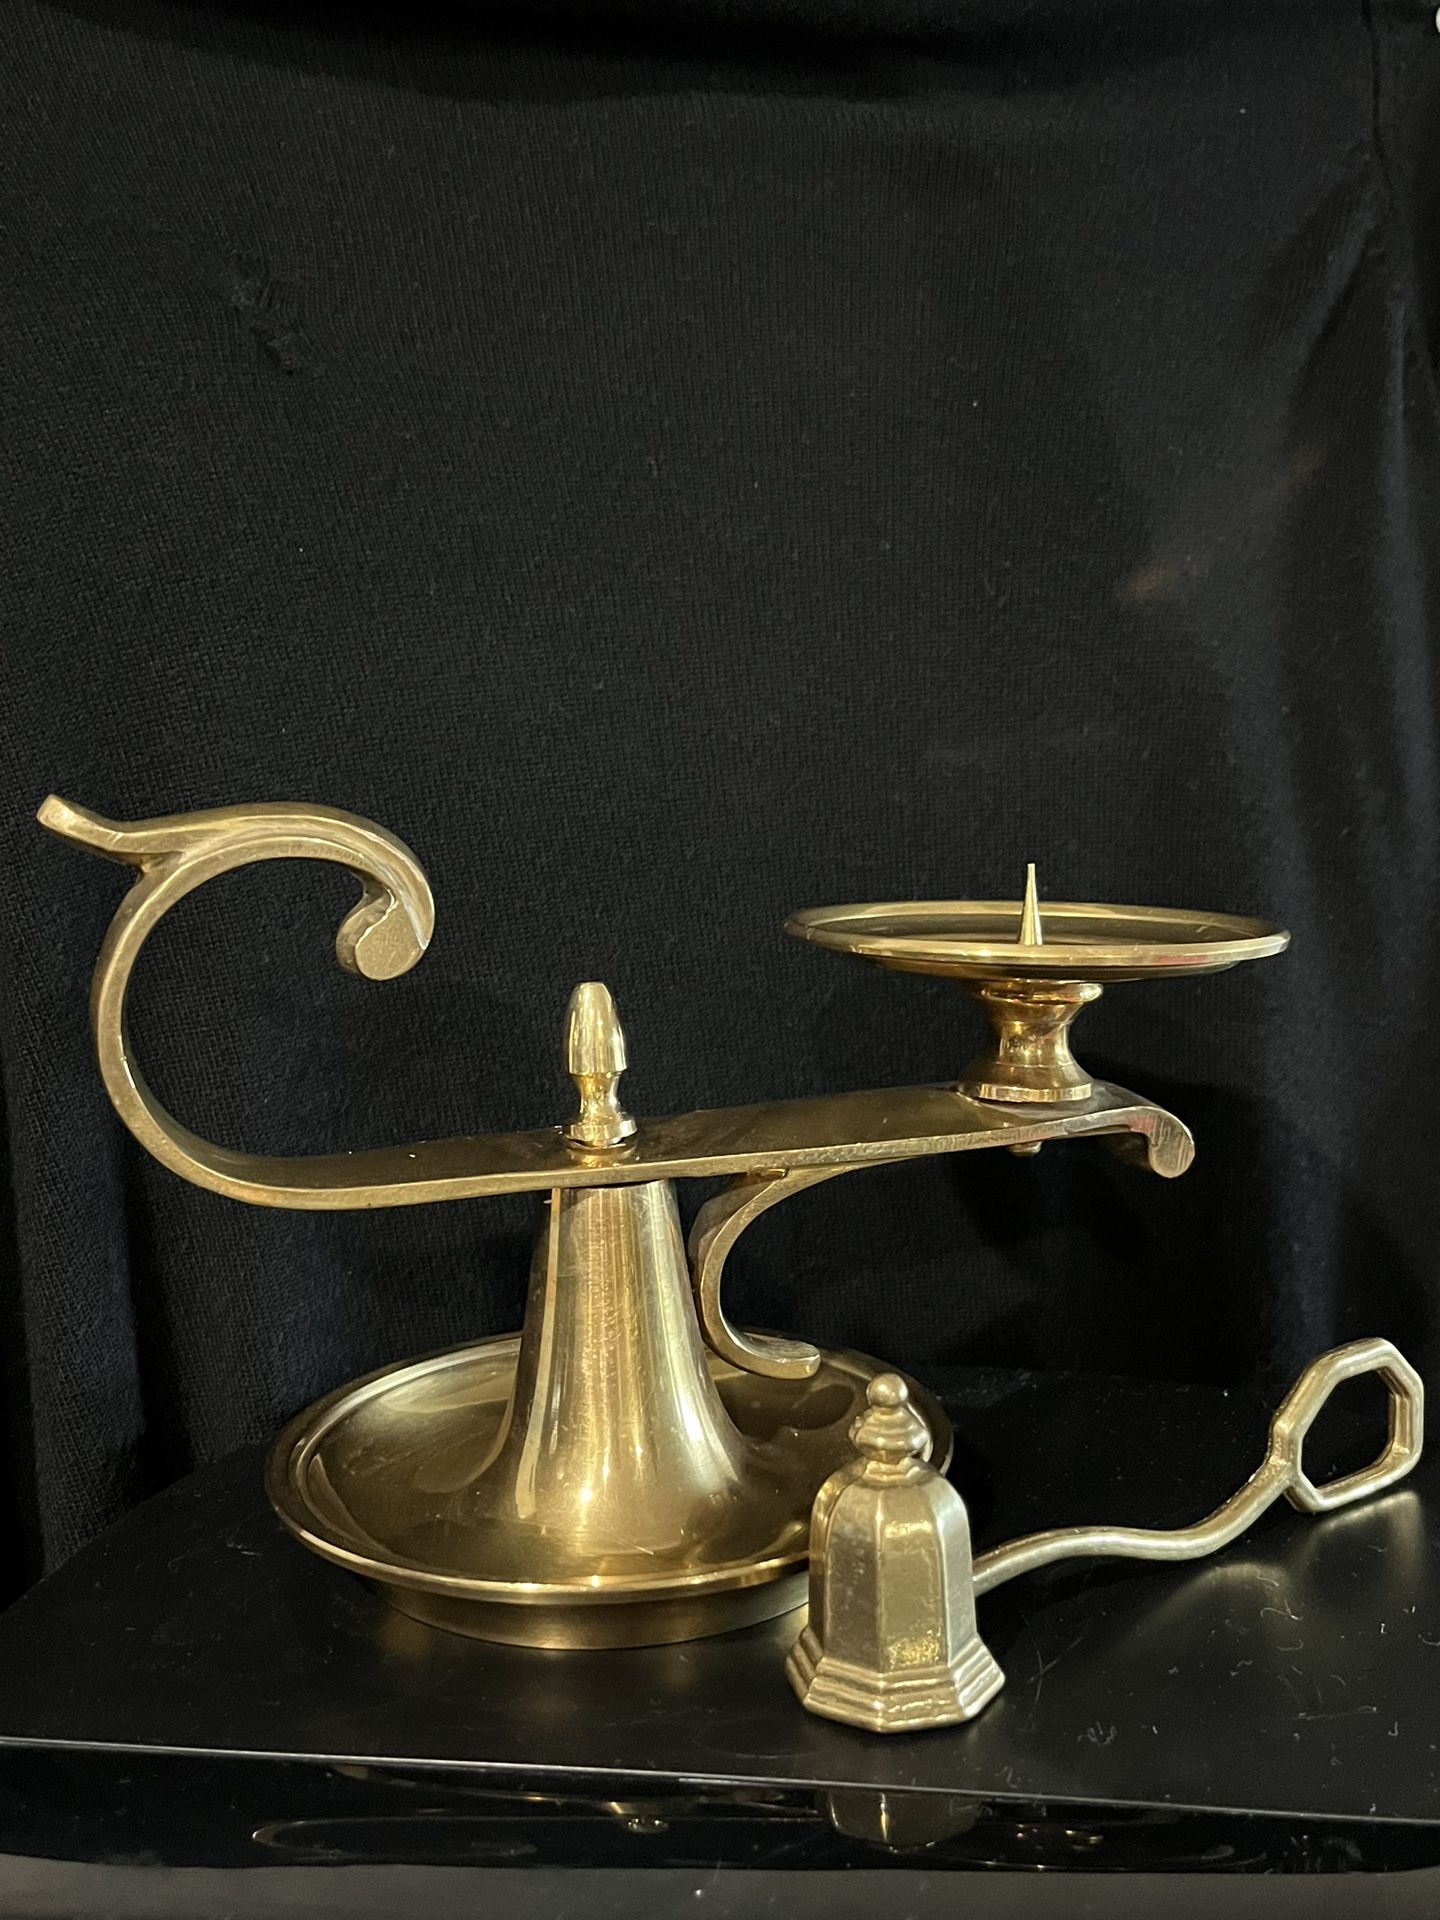 Vintage Brass Candle Holder With Matching Brass Snuffer